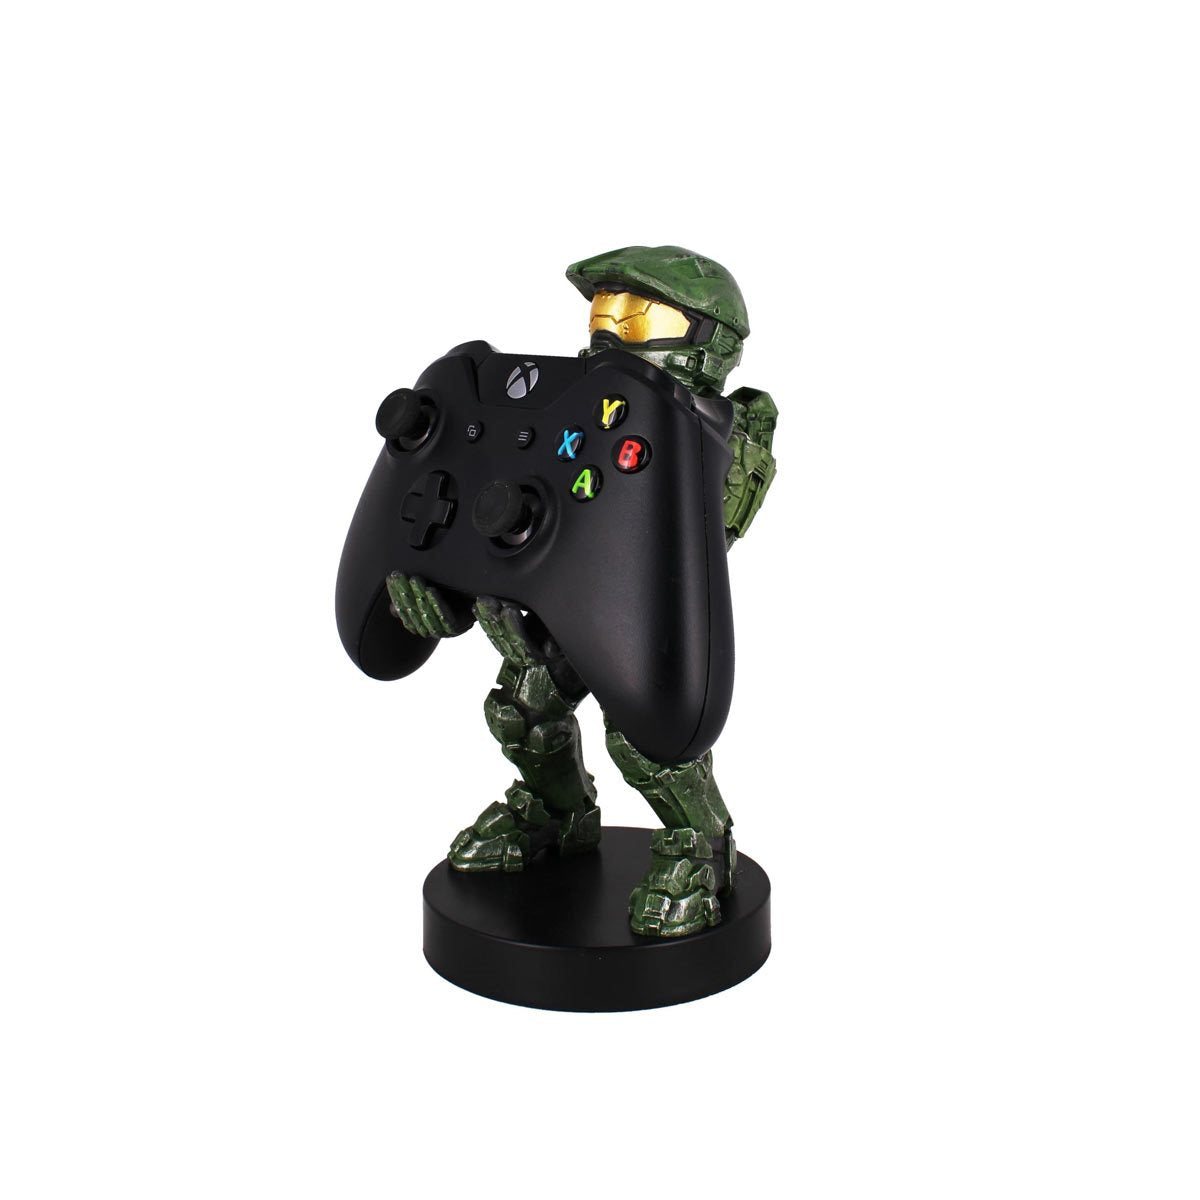 Halo Master Chief Cable Guy Controller Holder by Exquisite Gaming -Exquisite Gaming - India - www.superherotoystore.com